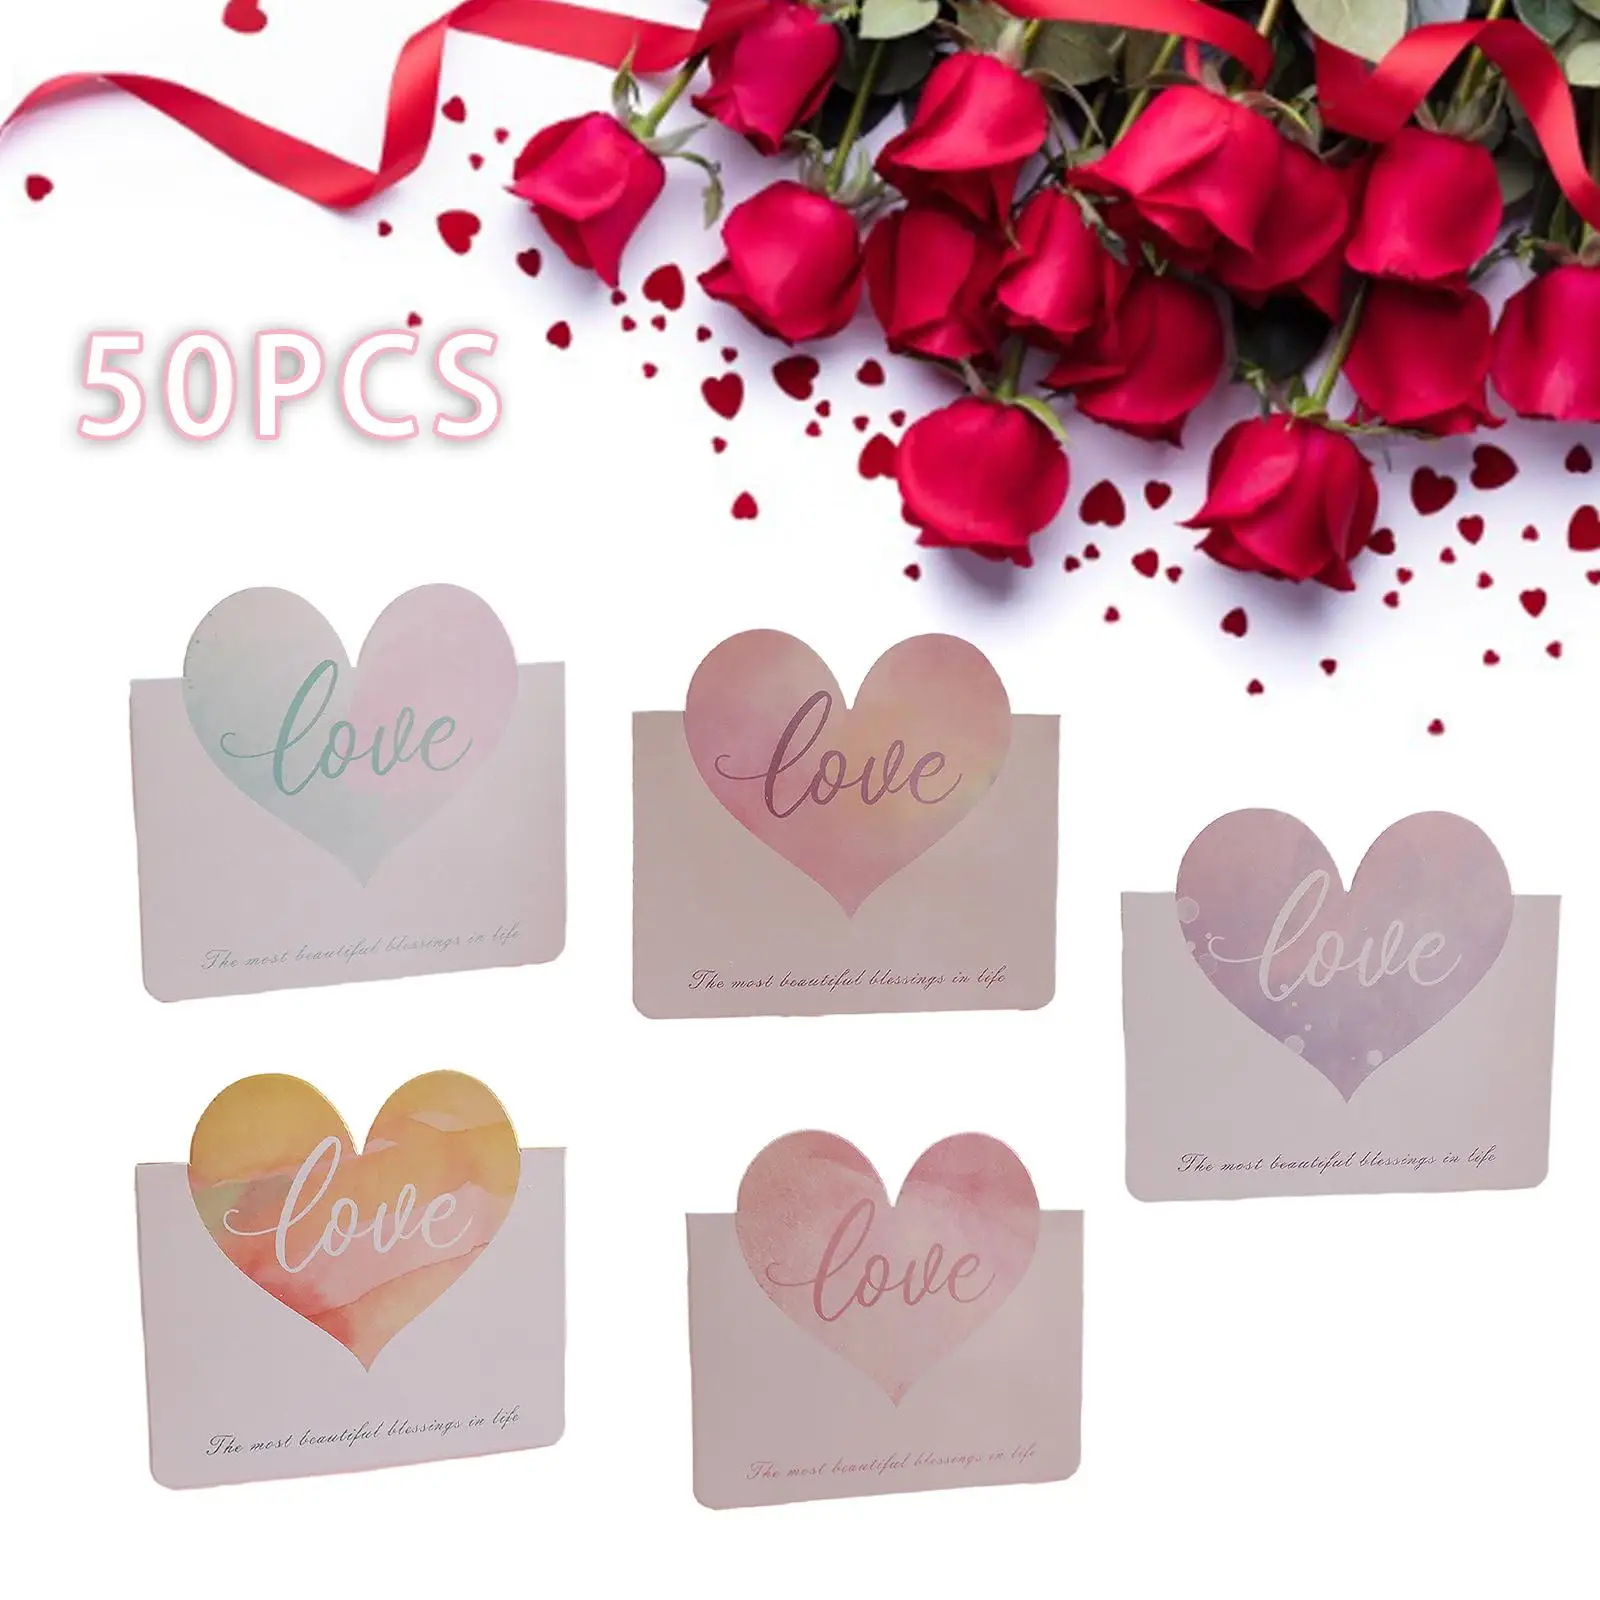 50 Pieces Valentines Day Cards Love Heart Note Cards Love Greeting Cards for Thanksgiving Anniversary Party Favors Flower Shop